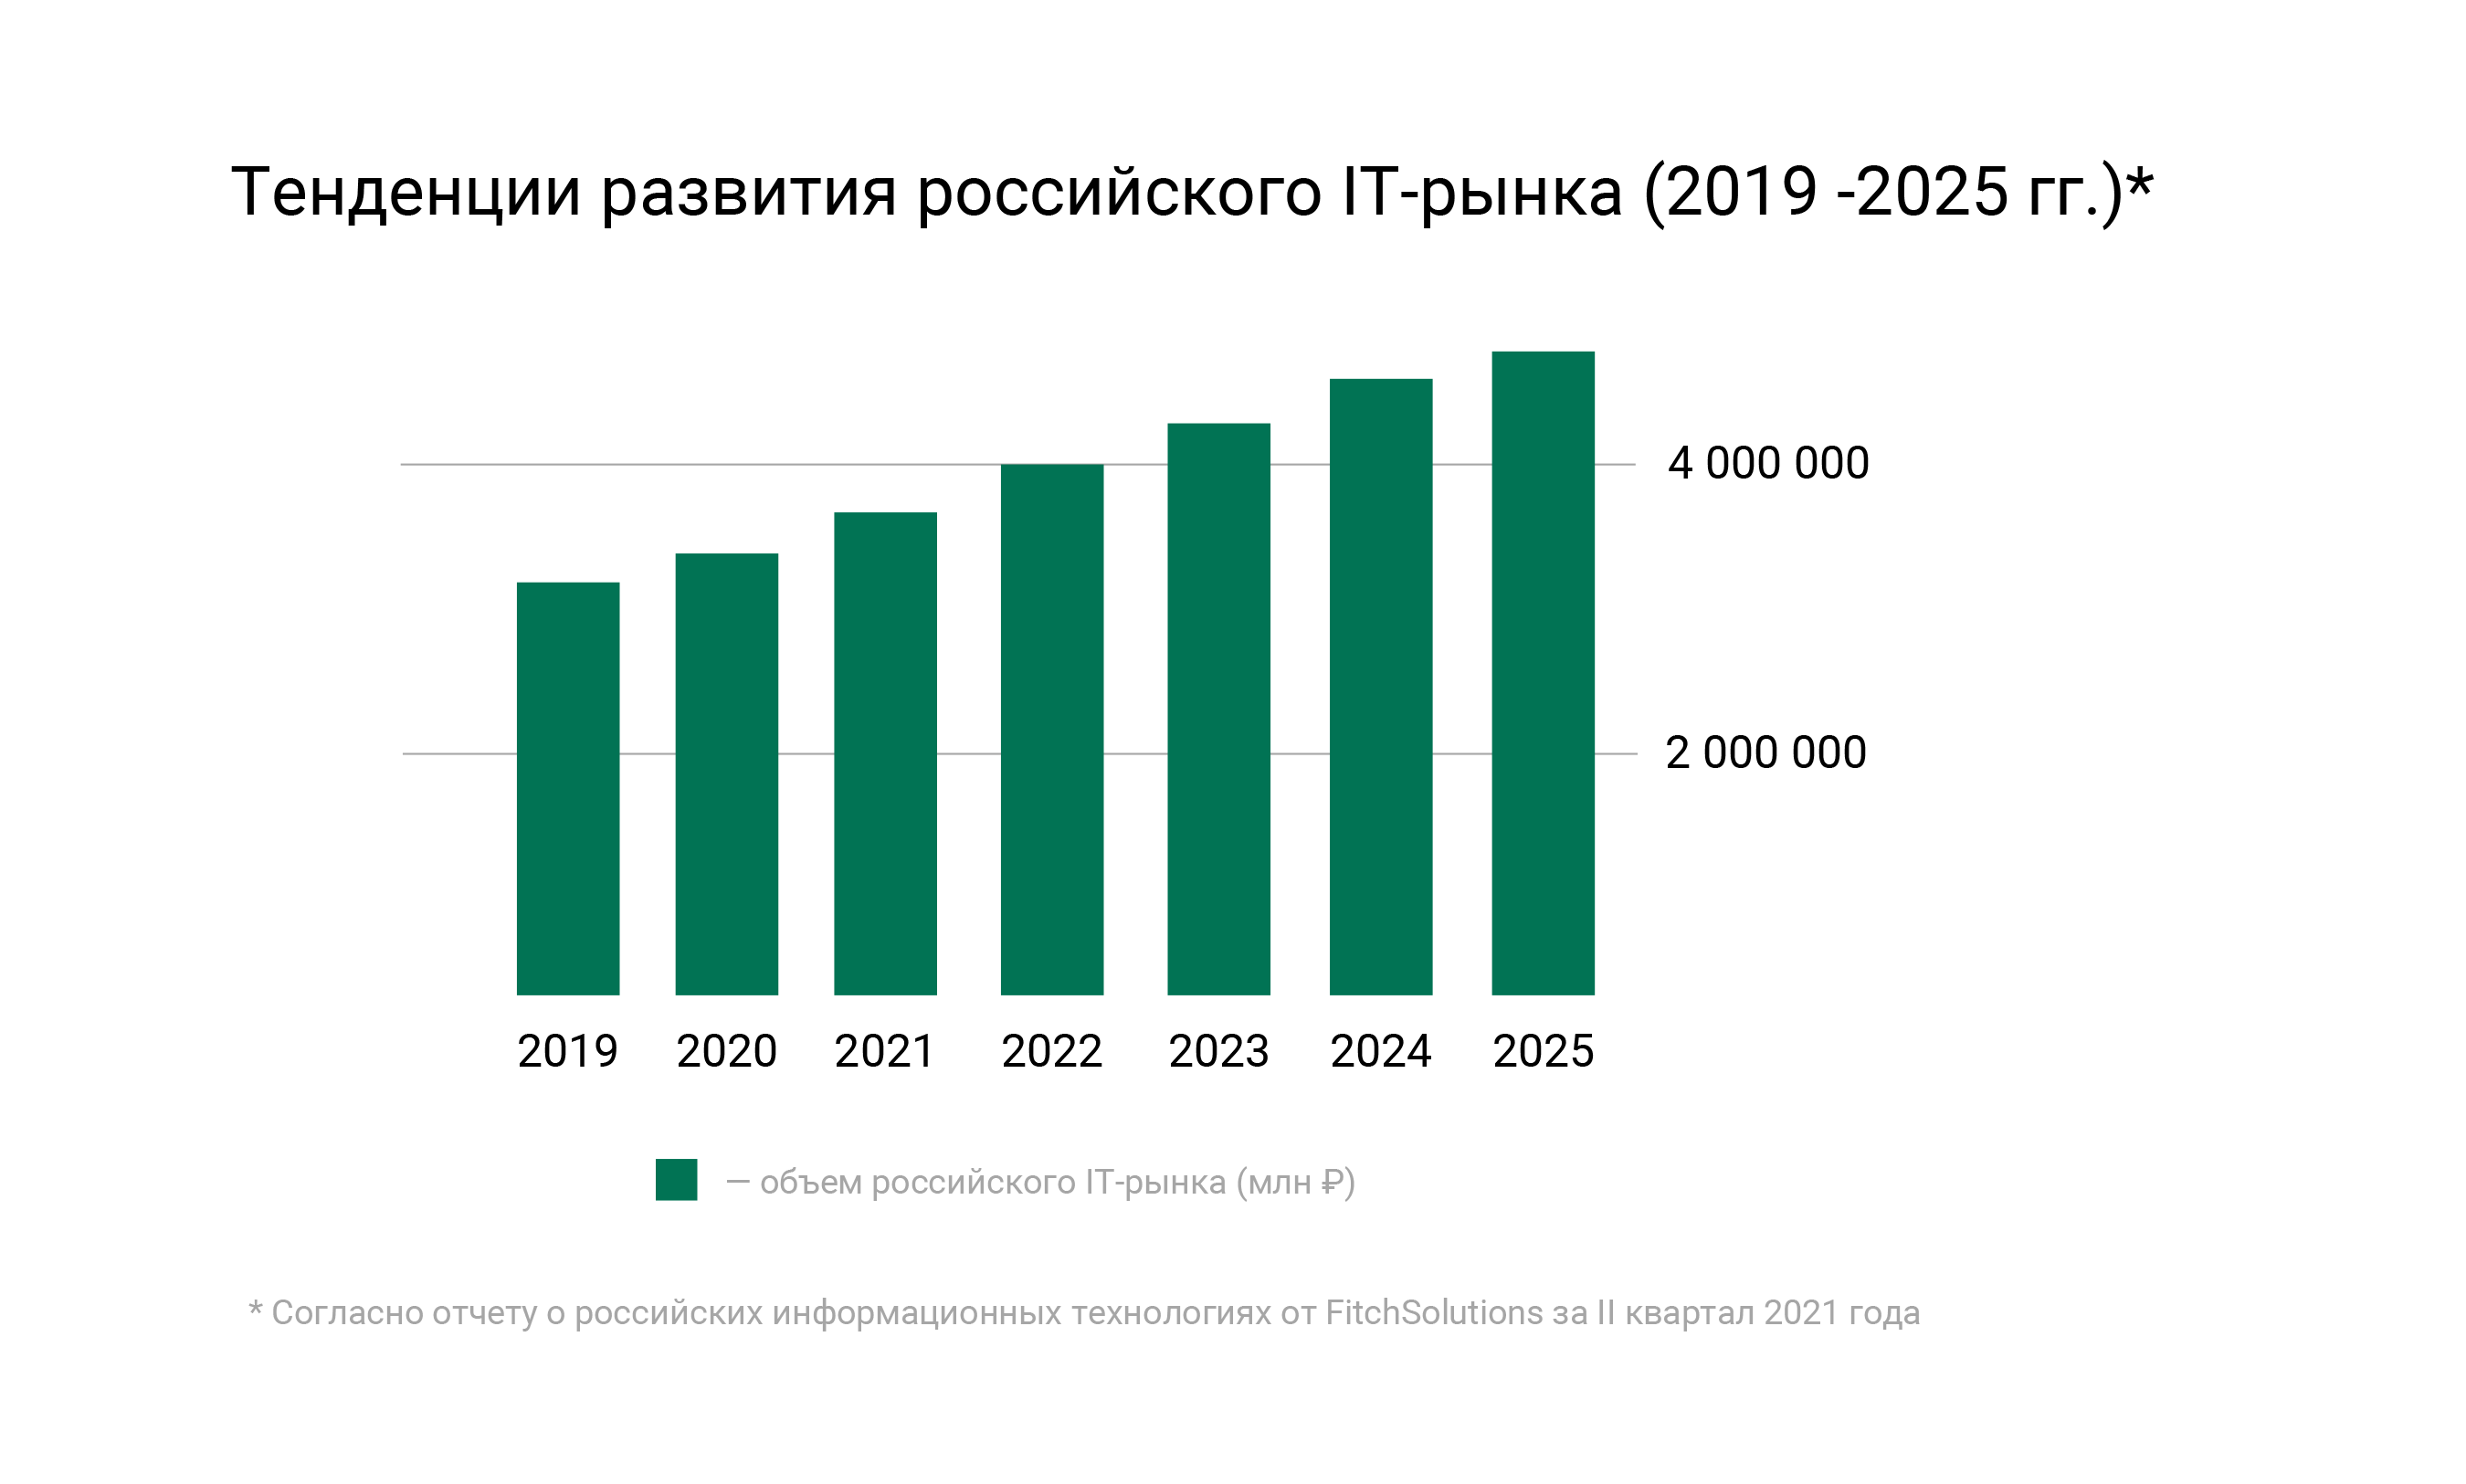 Trends in the development of the Russian IT market